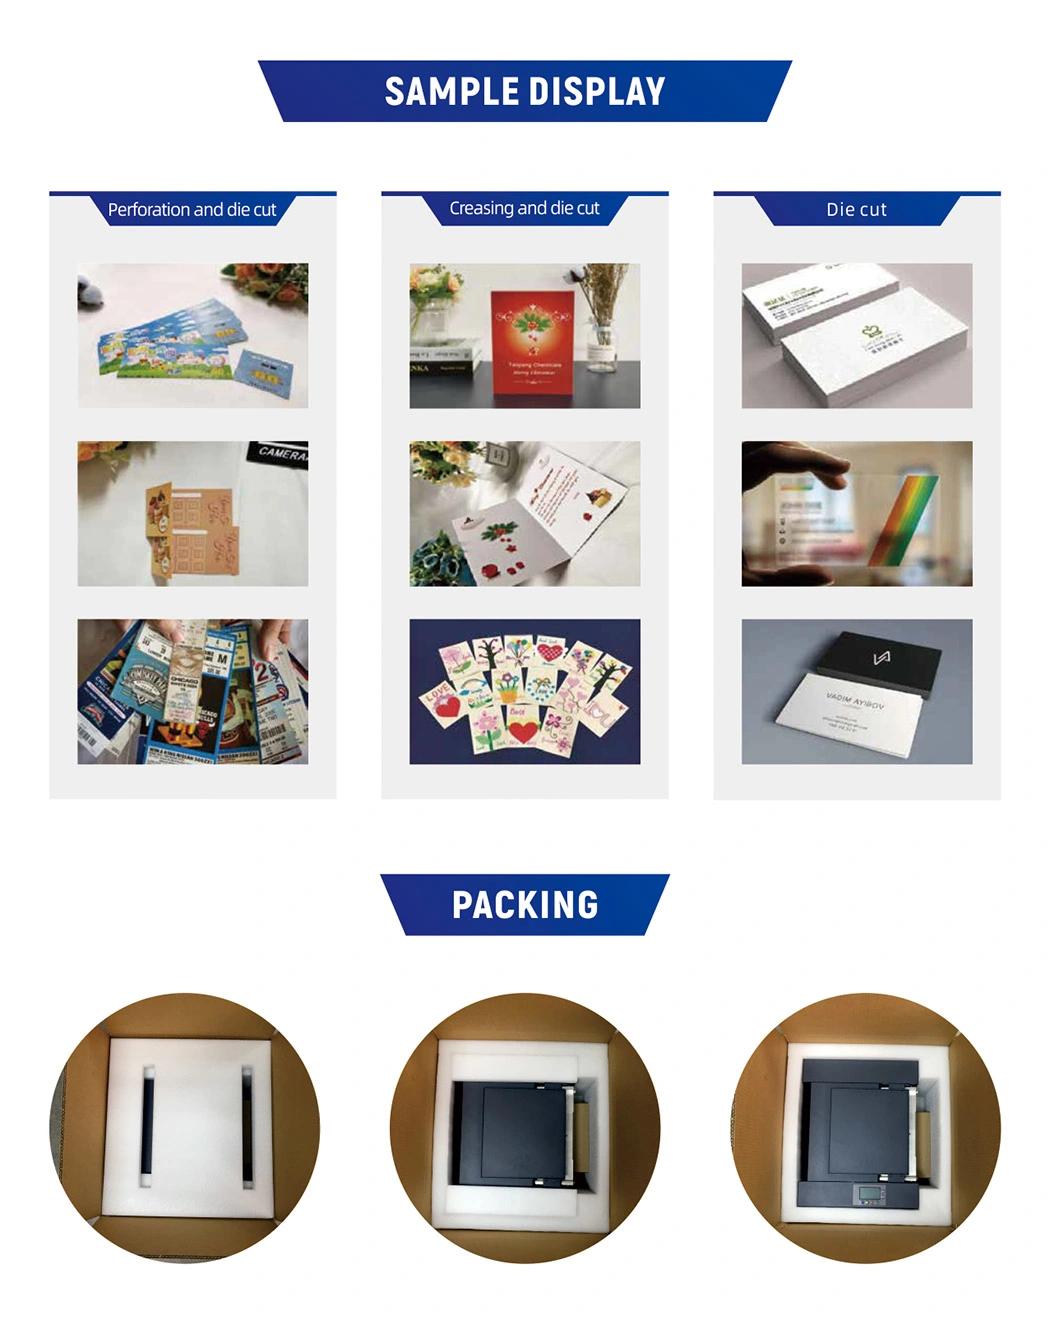 A3 Automatic Business Card Cutter, Coupon Ticket Card Cutter